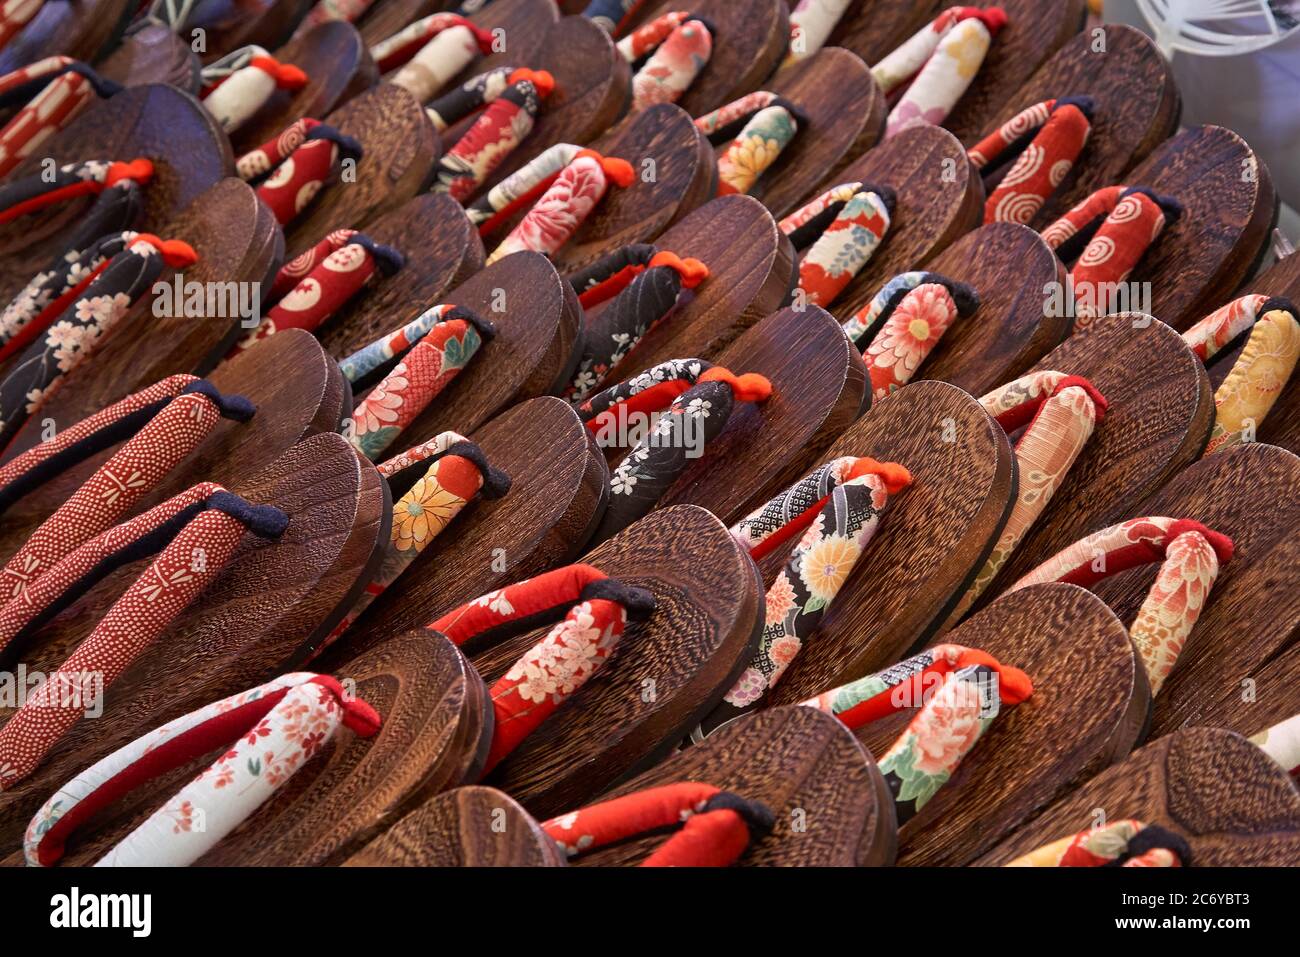 KYOTO, JAPAN - OCTOBER 22, 2007: The colorful female japanese wooden rounded sandals (zori), made of silk, exposed on the counter at the market of Kyo Stock Photo